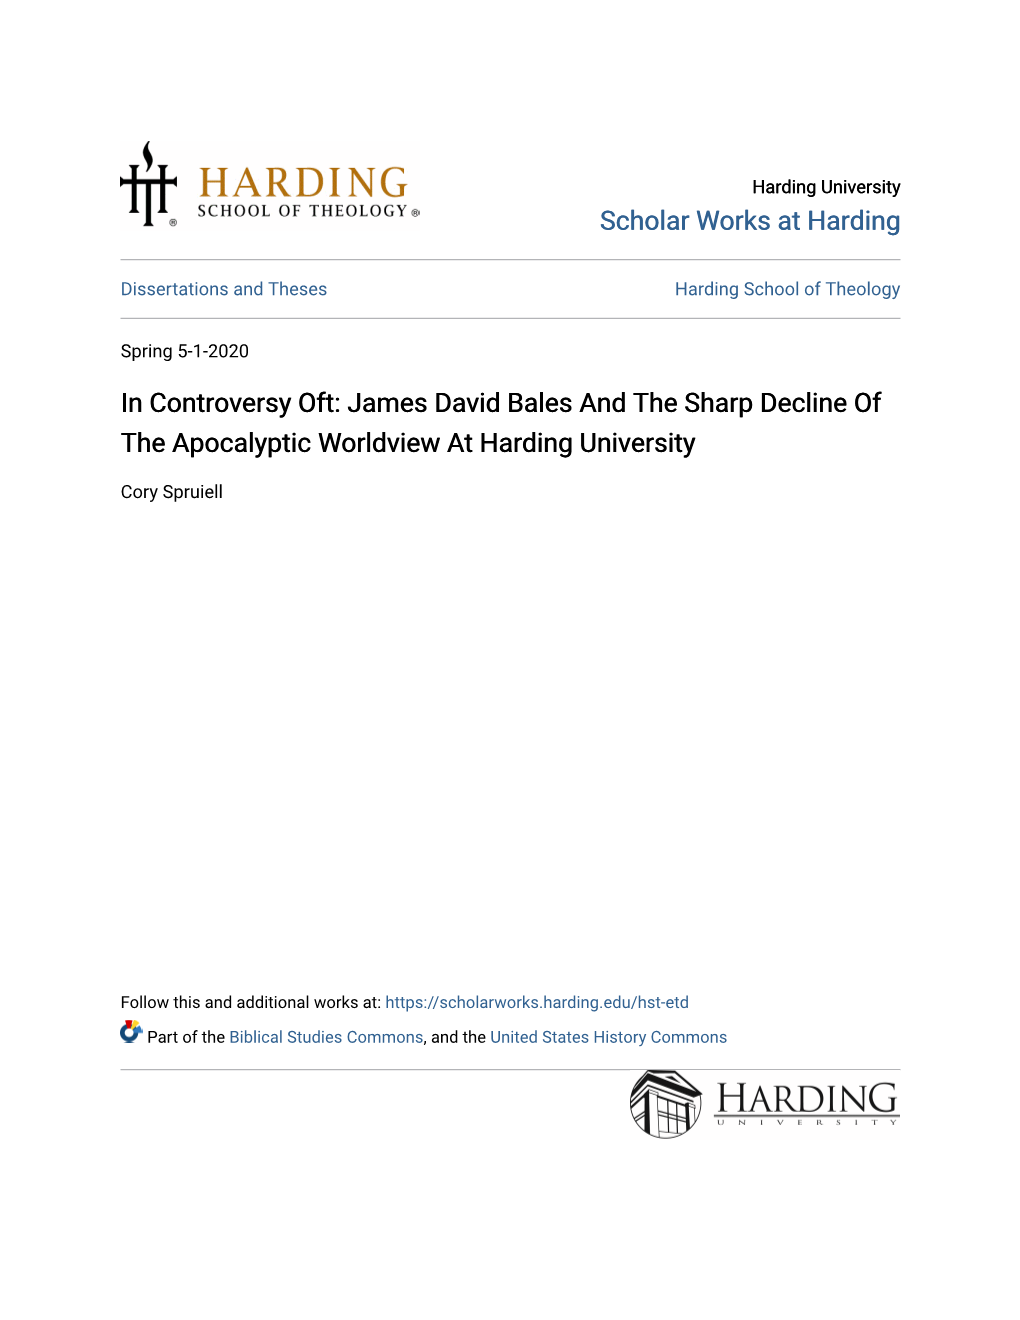 James David Bales and the Sharp Decline of the Apocalyptic Worldview at Harding University